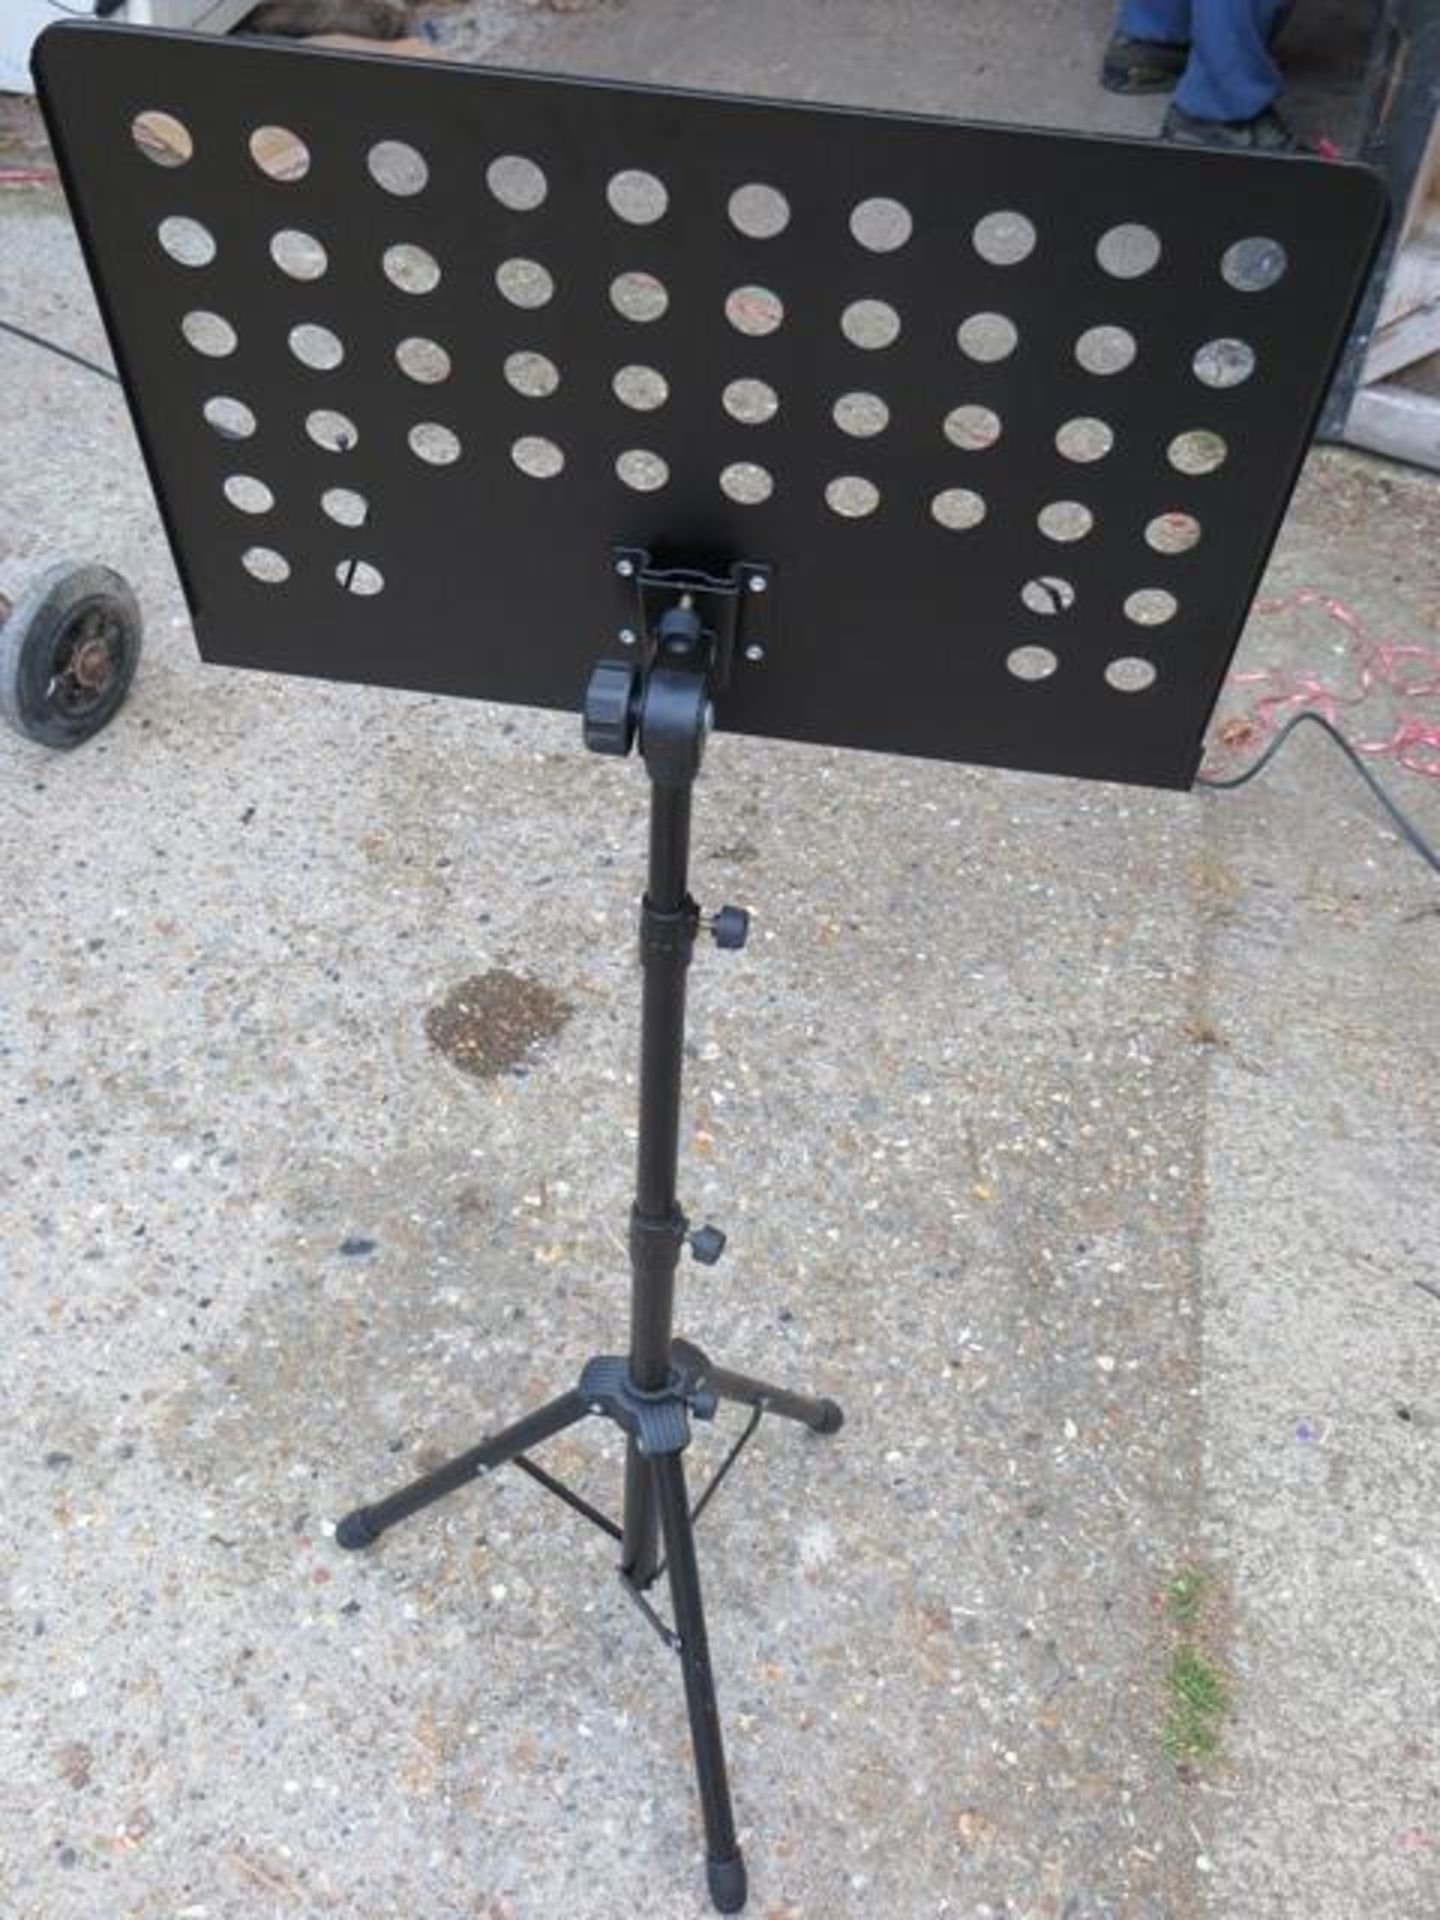 Eight Black Orchestral Sheet Music Stand Holders, adjustable height with tripod basePlease note: - Image 2 of 2